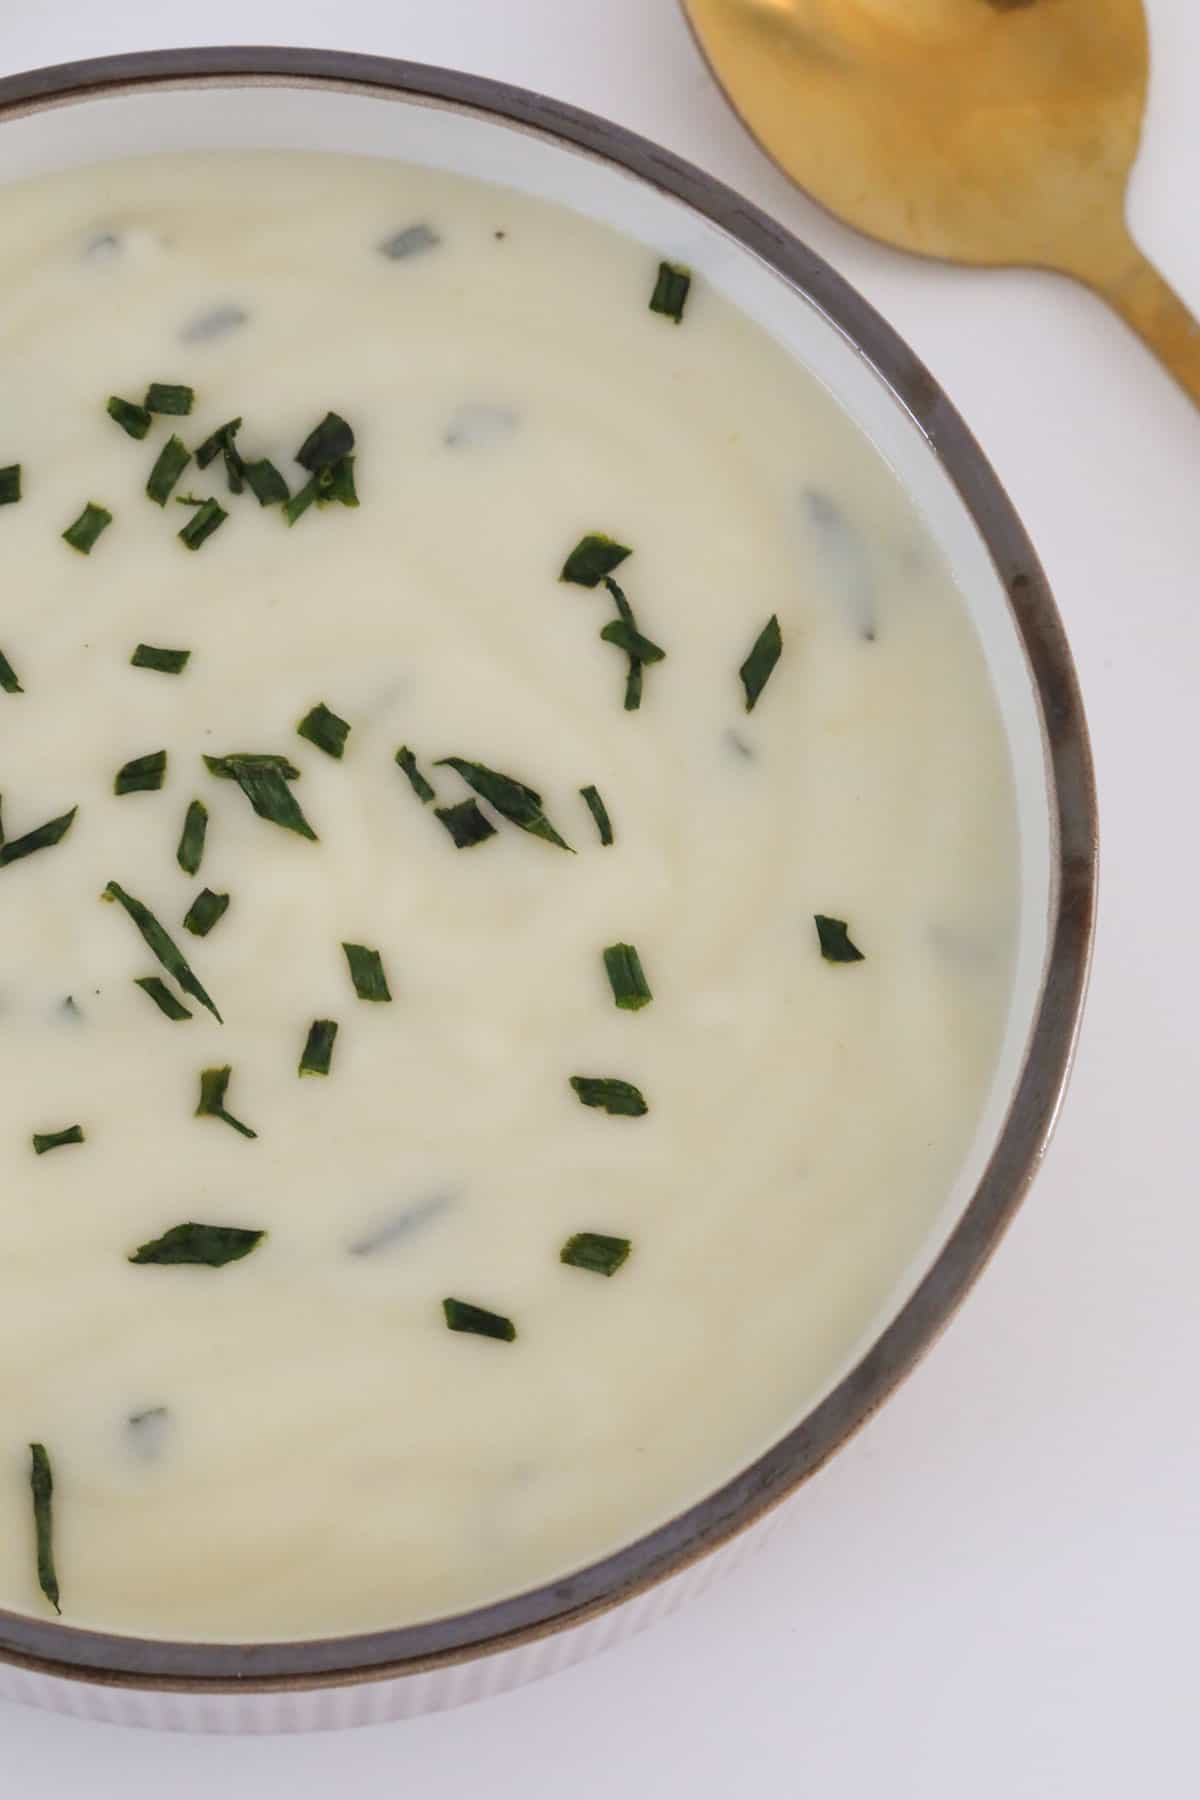 An overhead shot of chives sprinkled on creamy soup in a bowl.